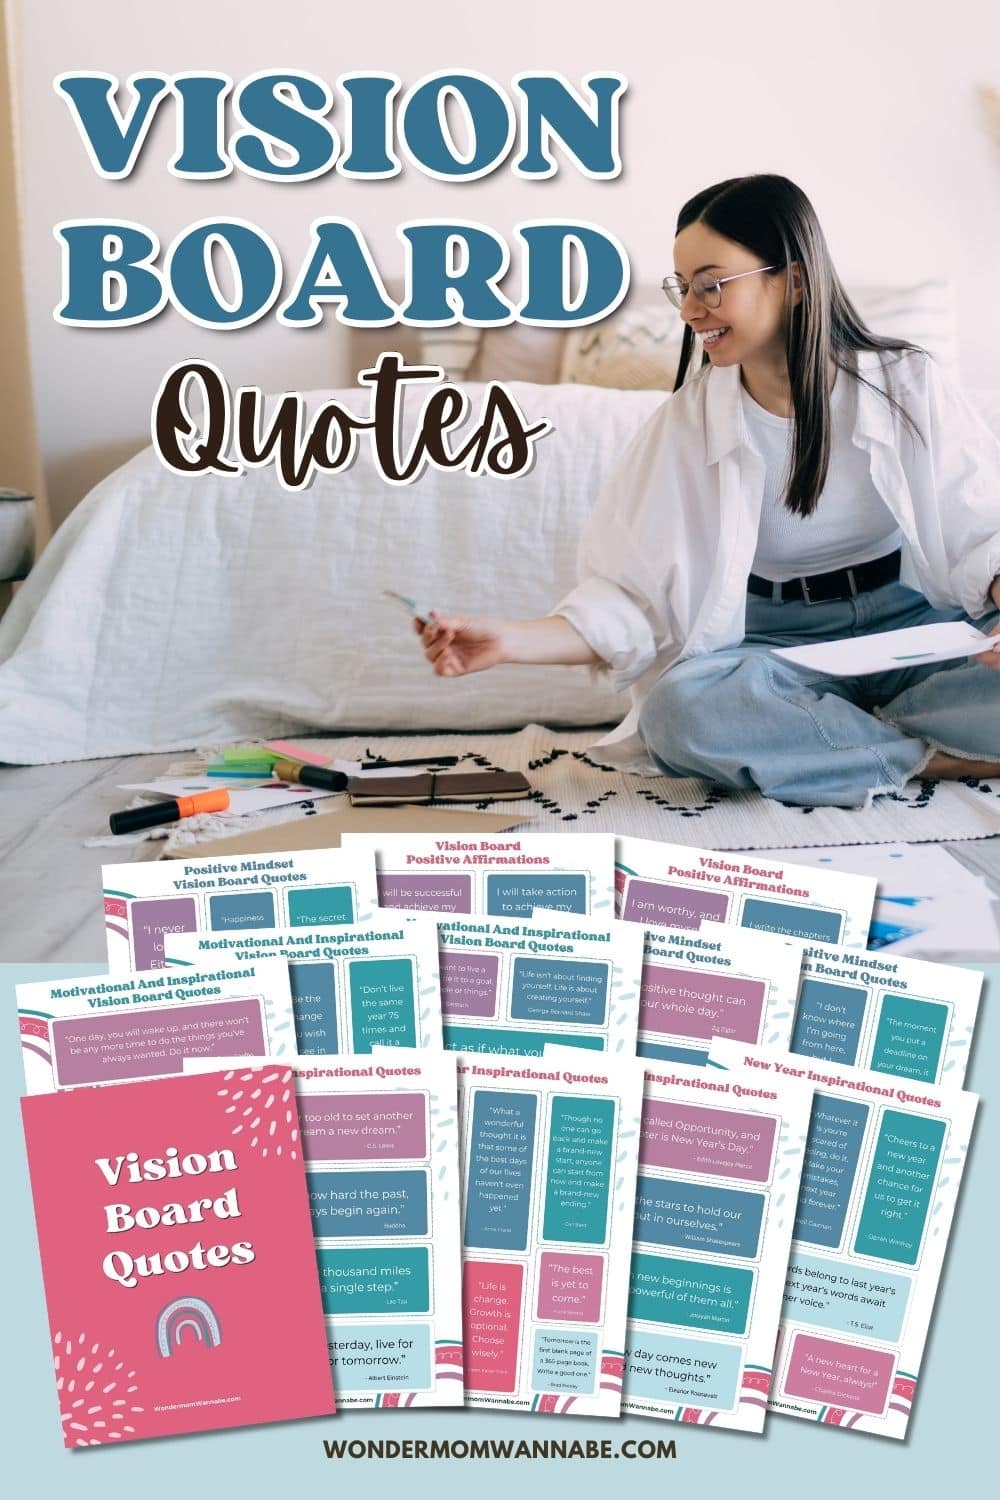 Vision board quotes are powerful affirmations and words of inspiration that you can display on your personal vision board - a visual representation of your goals, dreams, and aspirations. These carefully chosen vision board quotes serve